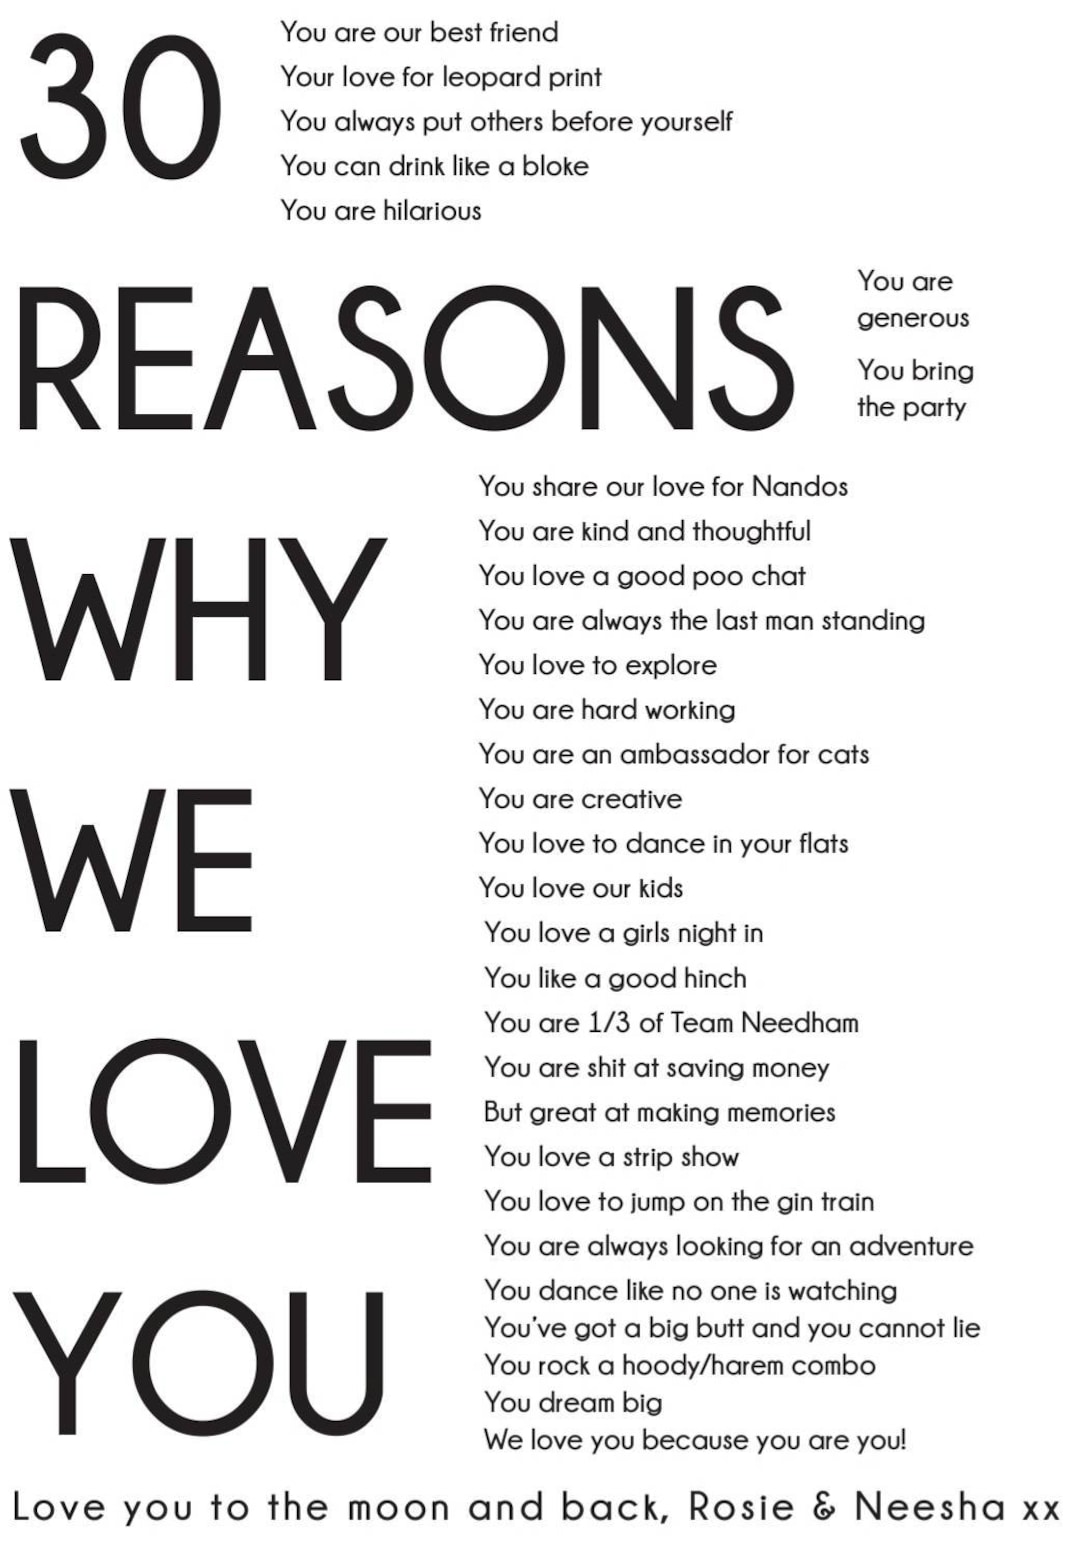 30-reasons-why-we-i-love-you-print-friend-picture-gift-for-etsy